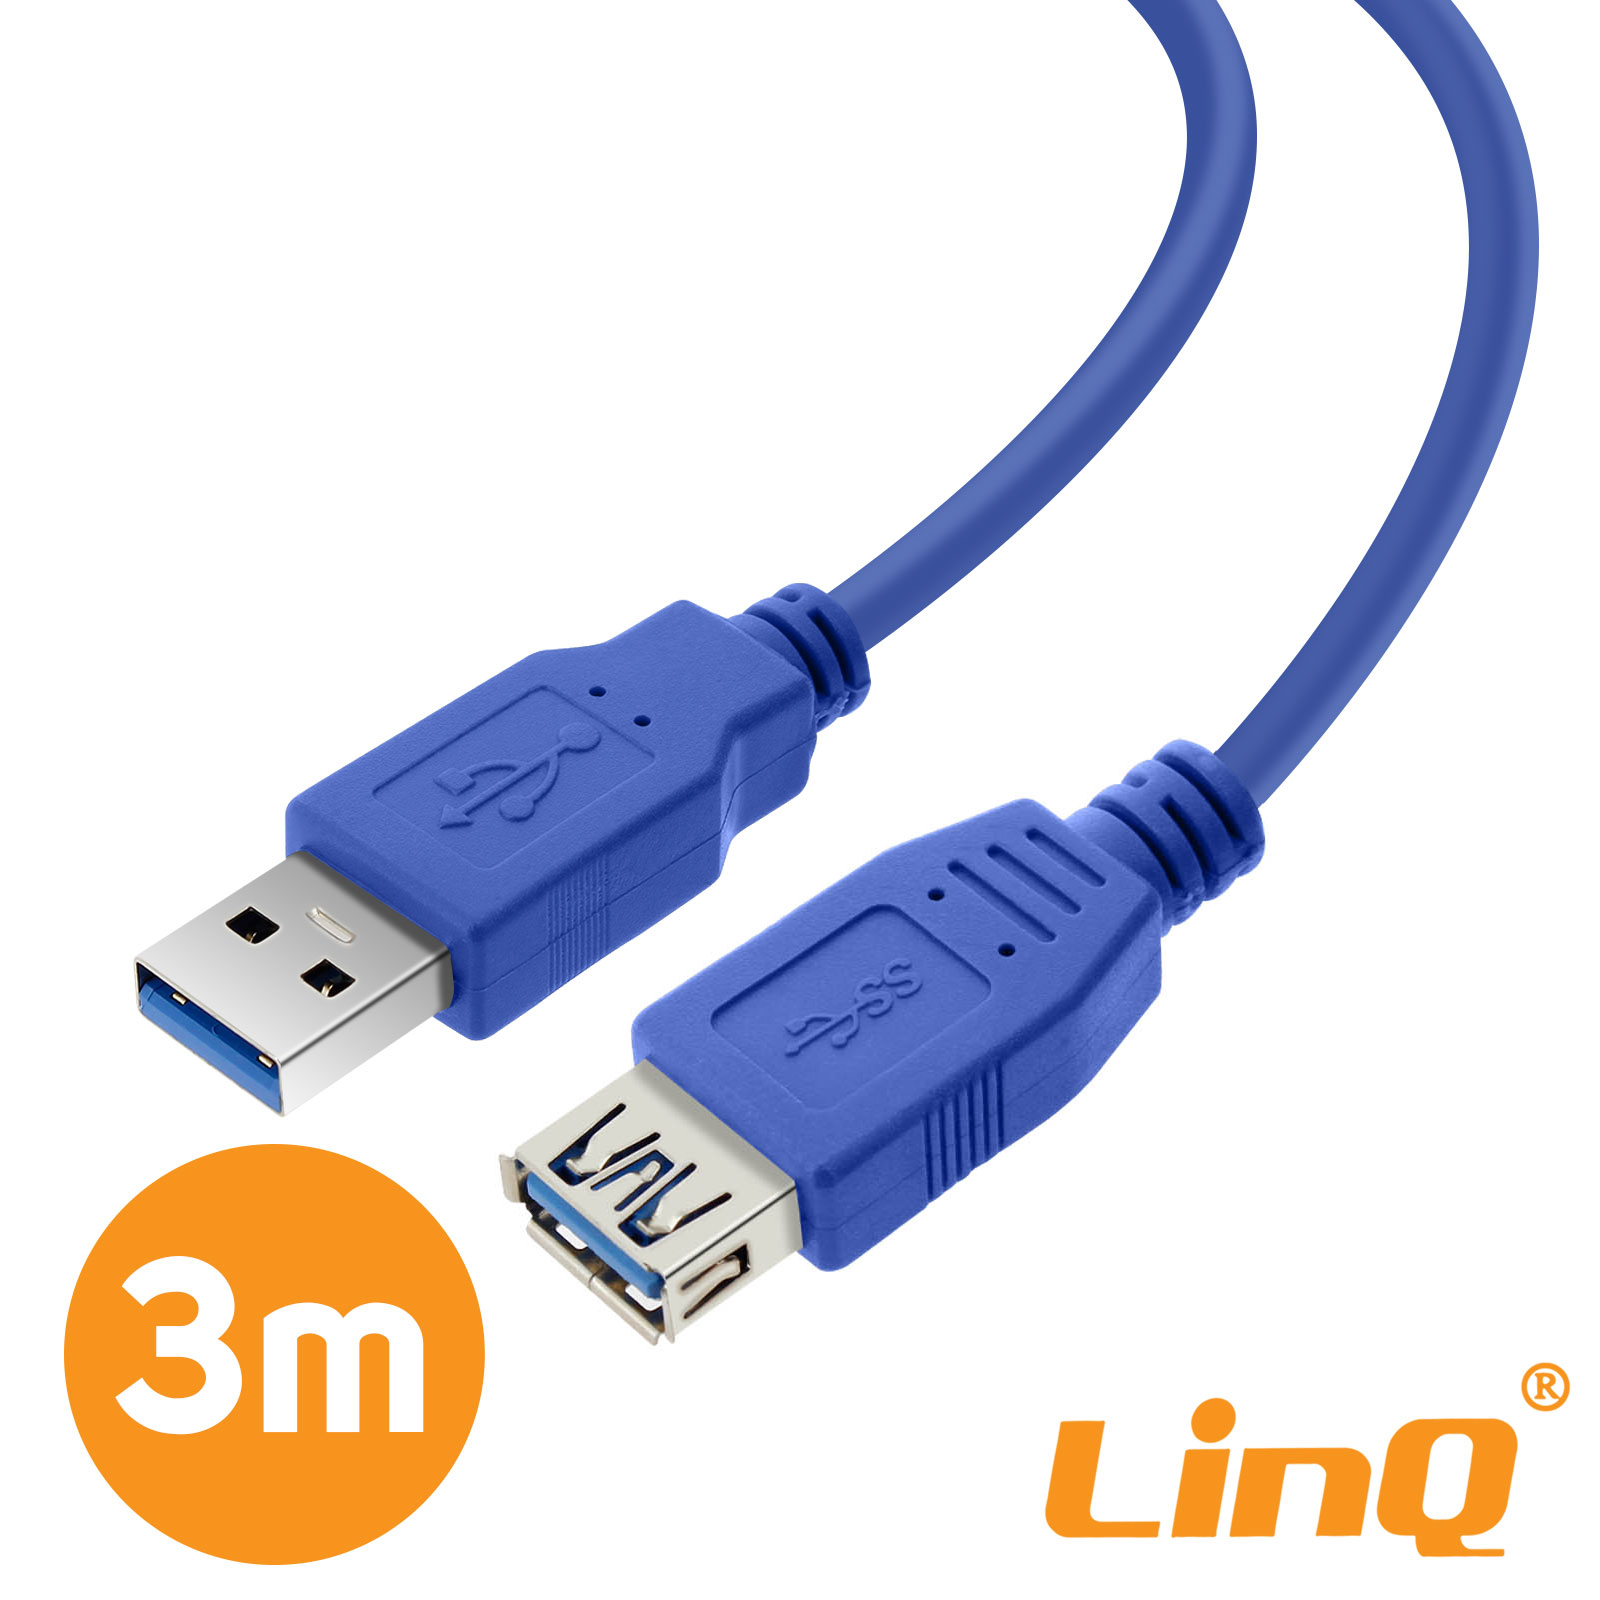 CABLE USB MALE FEMELLE EXTENSION 3M